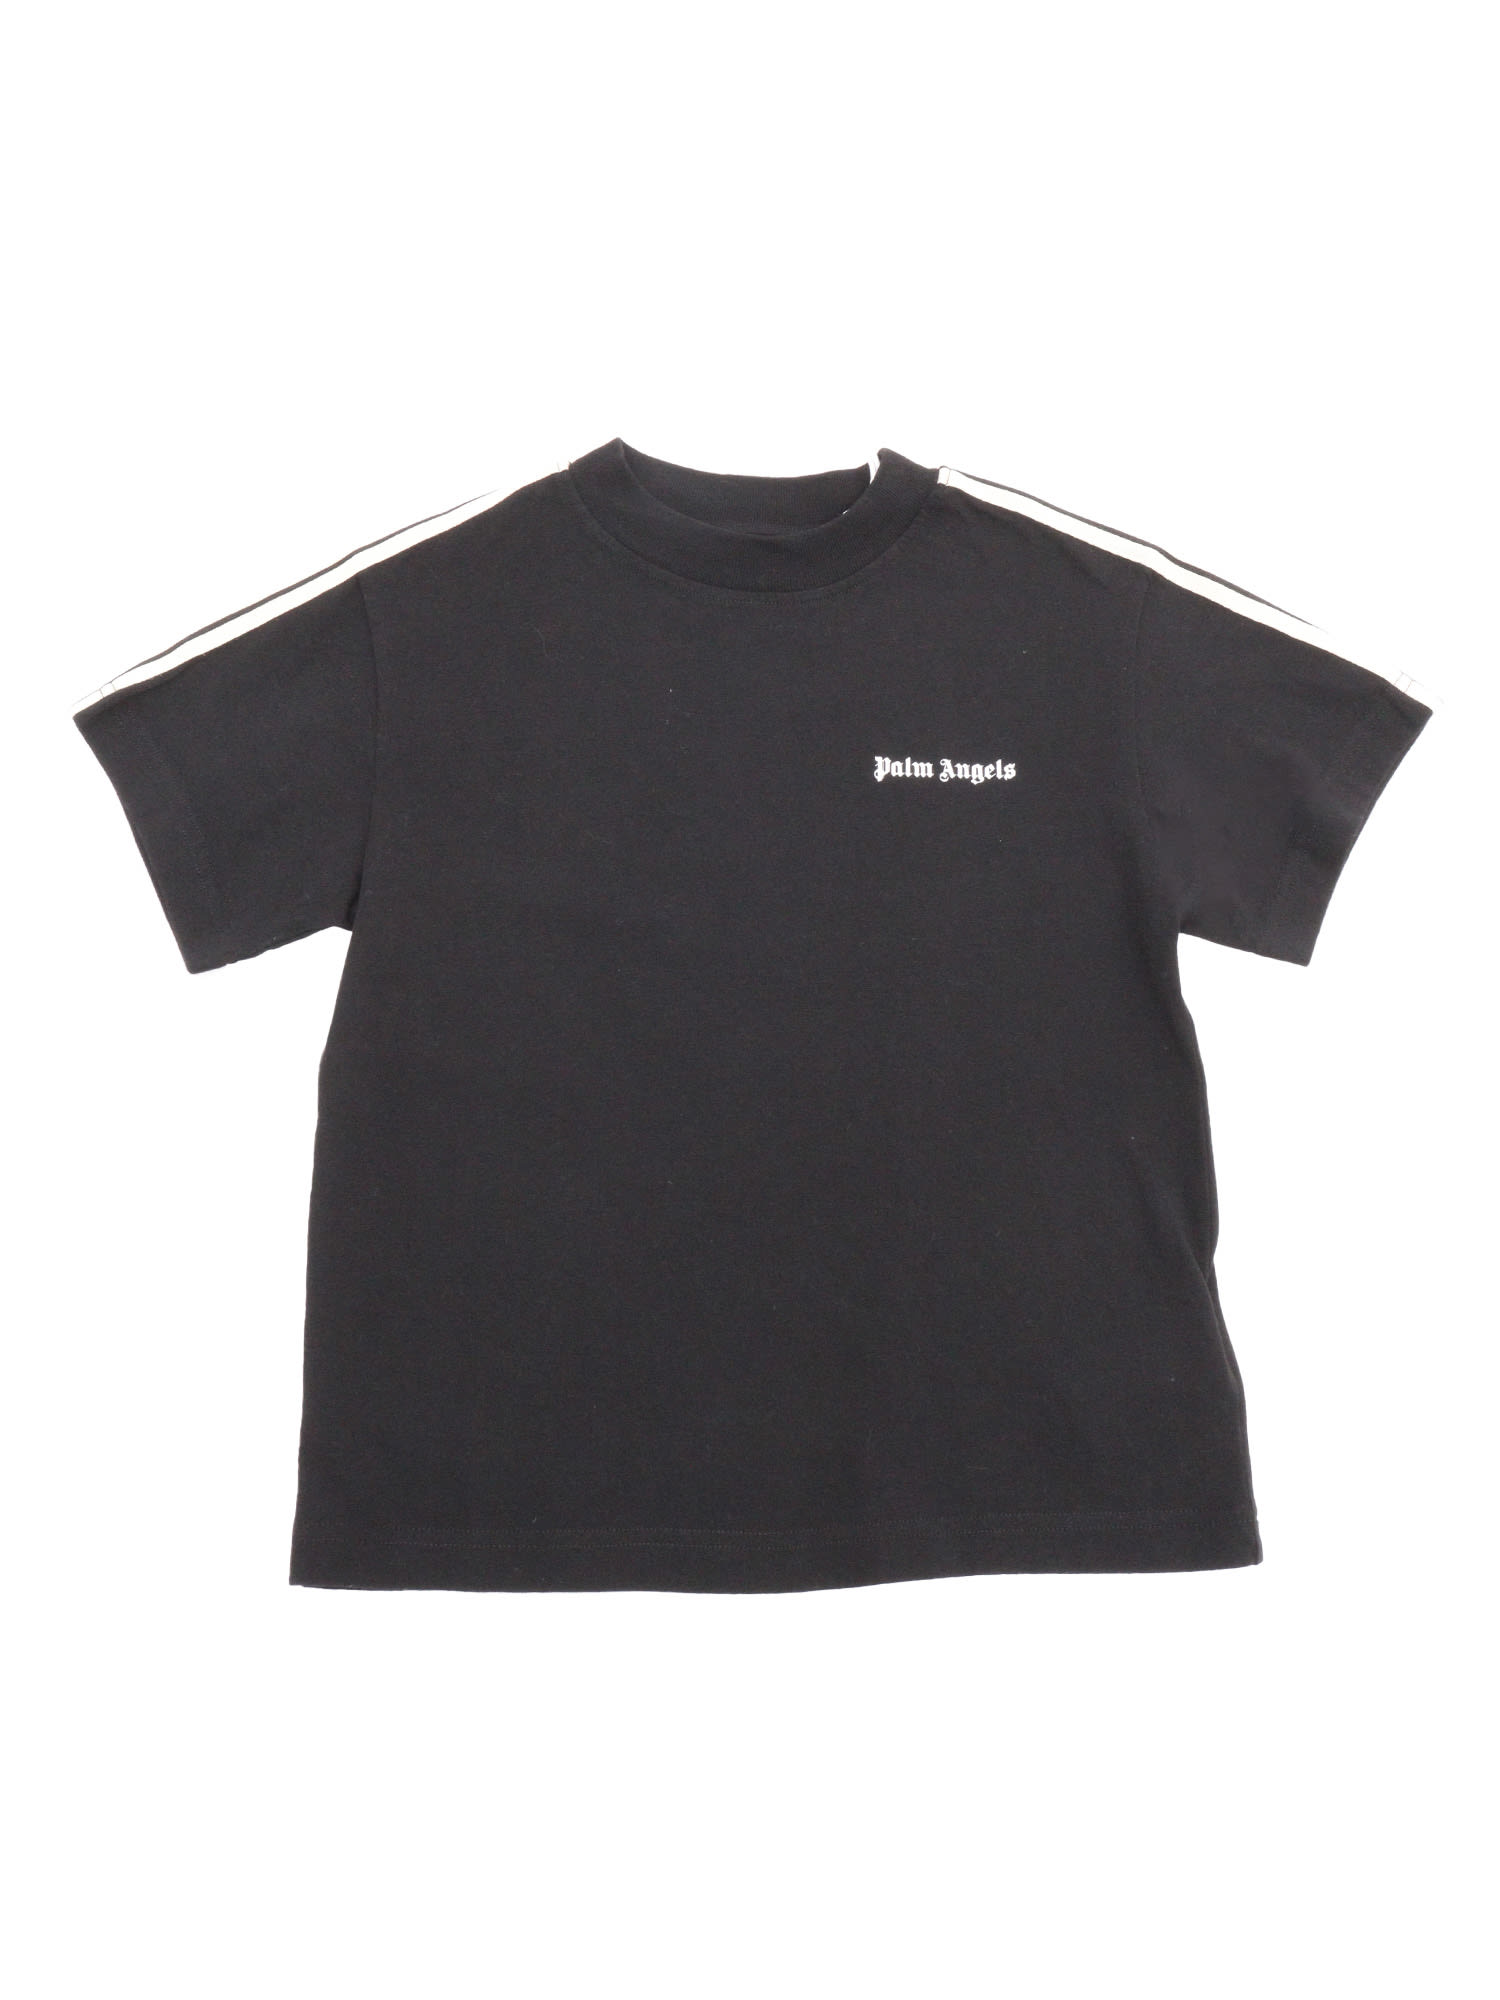 Palm Angels Black T-shirt With Logo